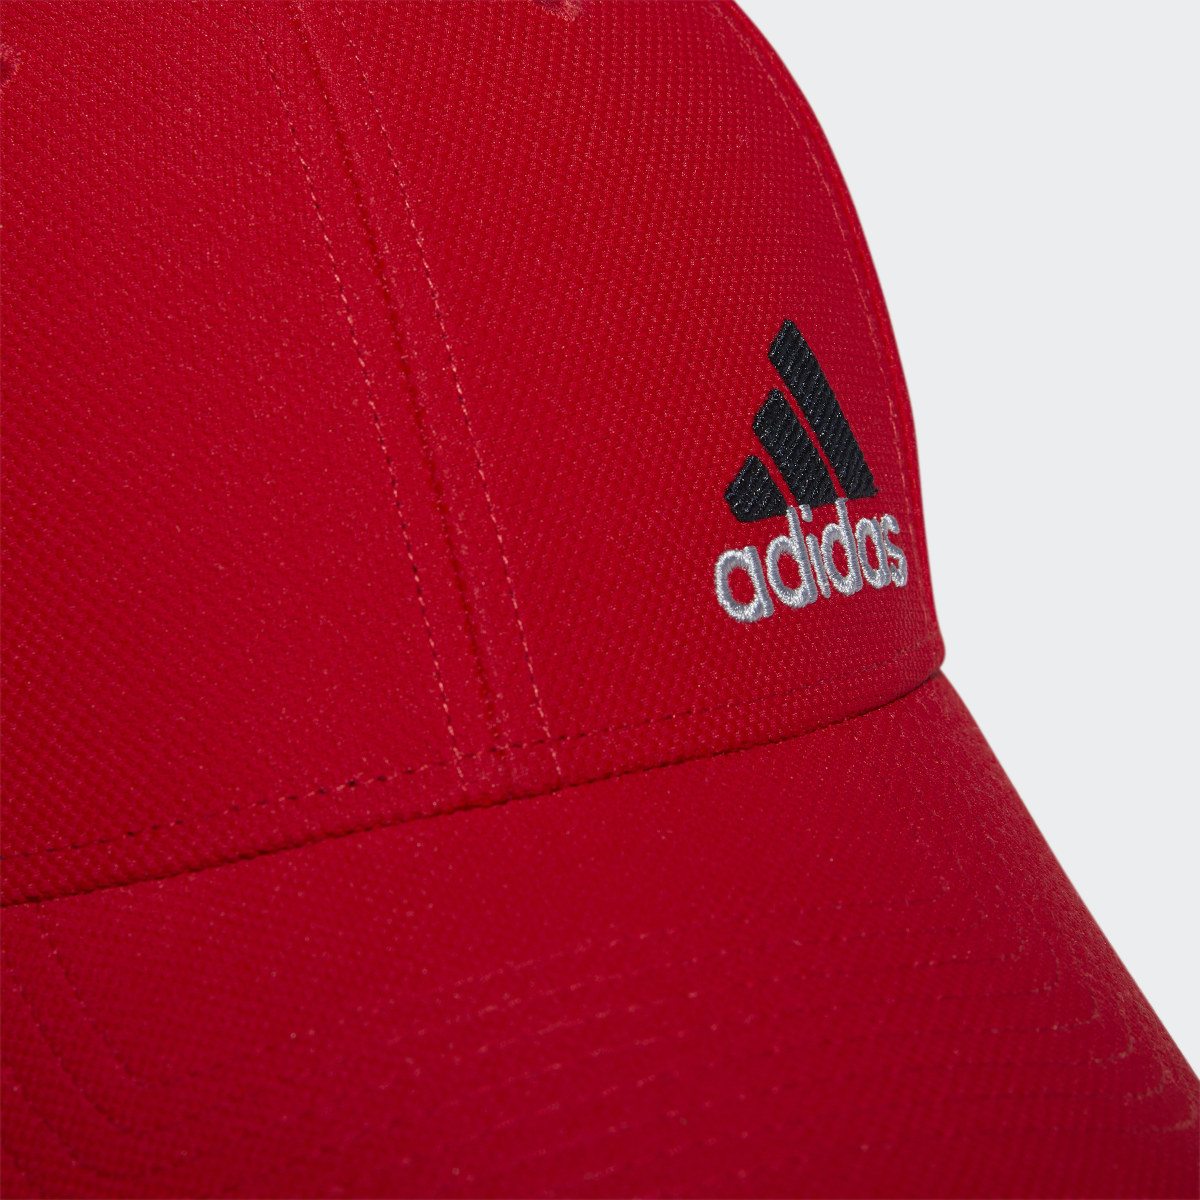 Adidas Release Stretch Fit Hat. 6